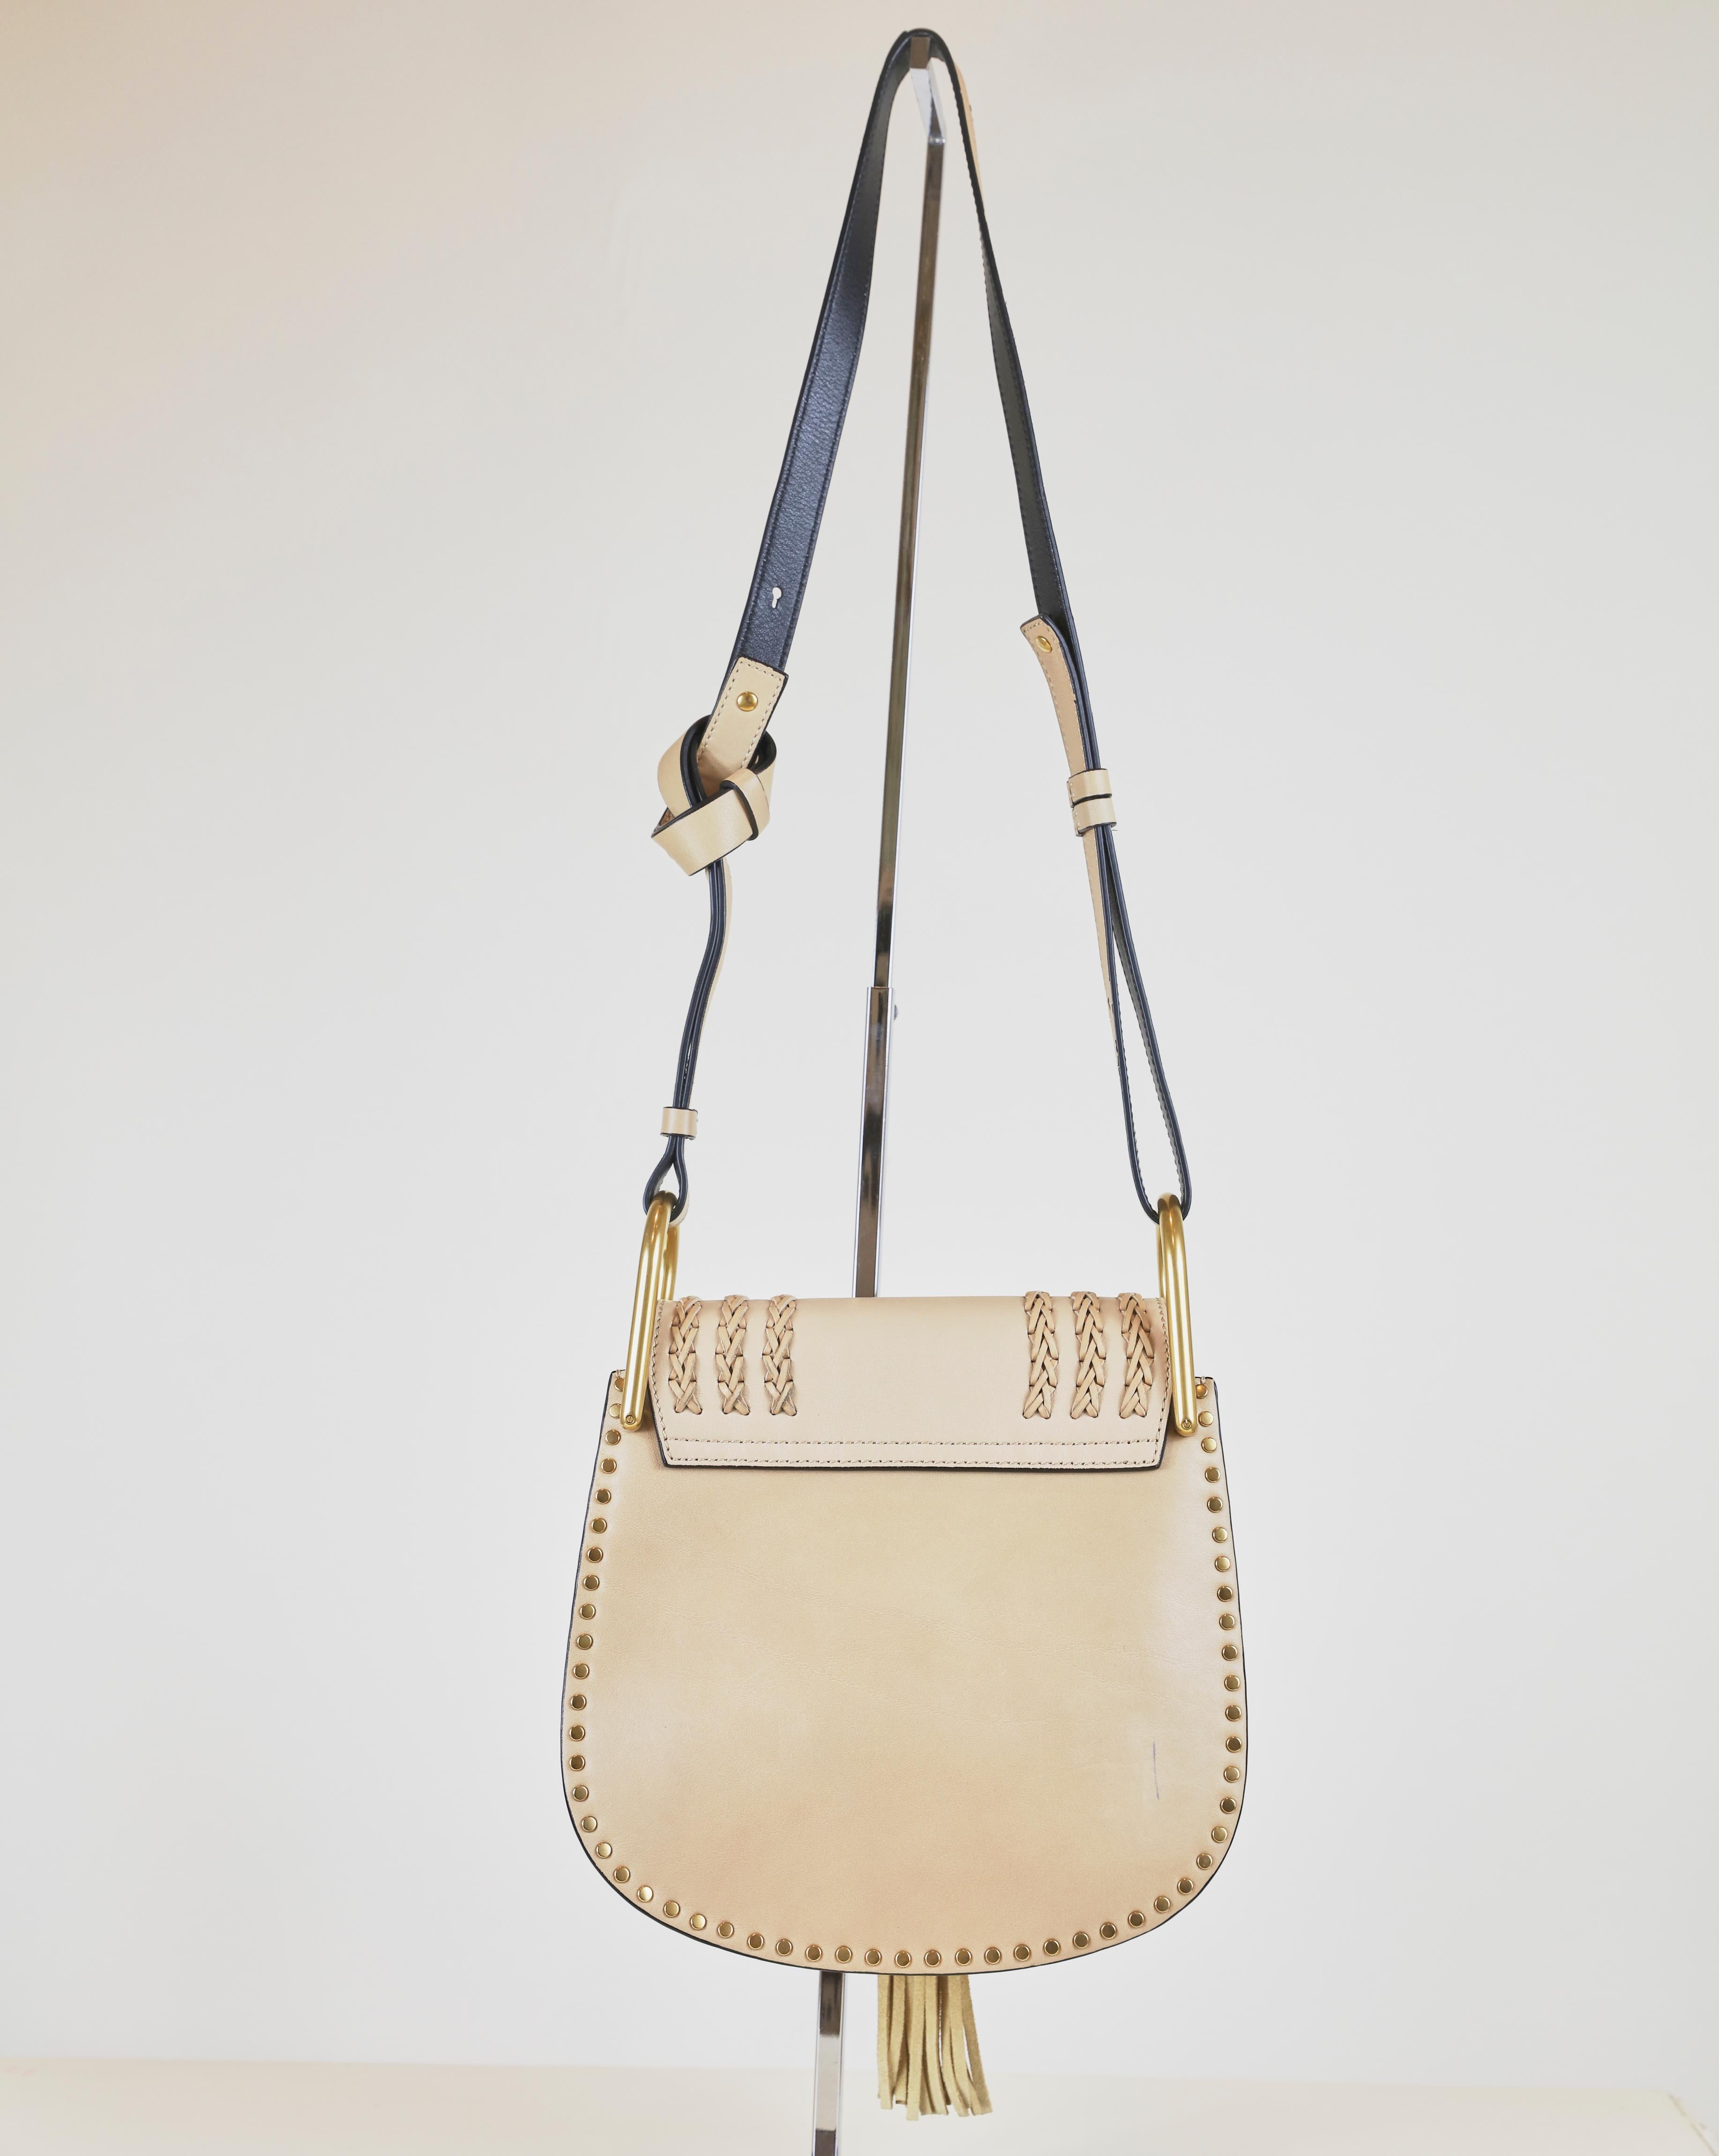 Chloe Beige Leather Crossbody Bag with Braided, Studded & Tassel Detail
Retails for $2,150.00!